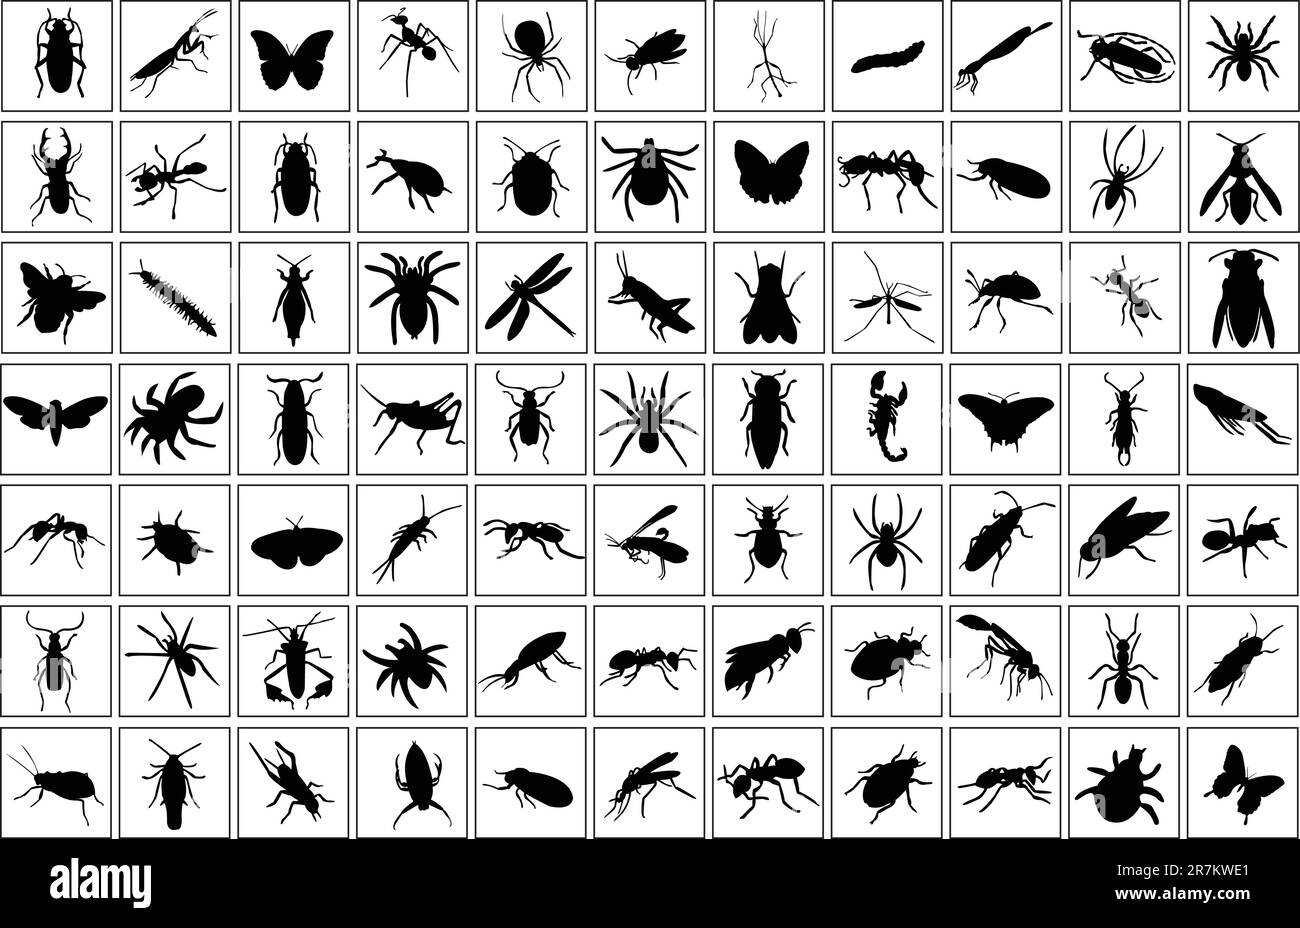 collection of bugs silhouette - vector Stock Vector